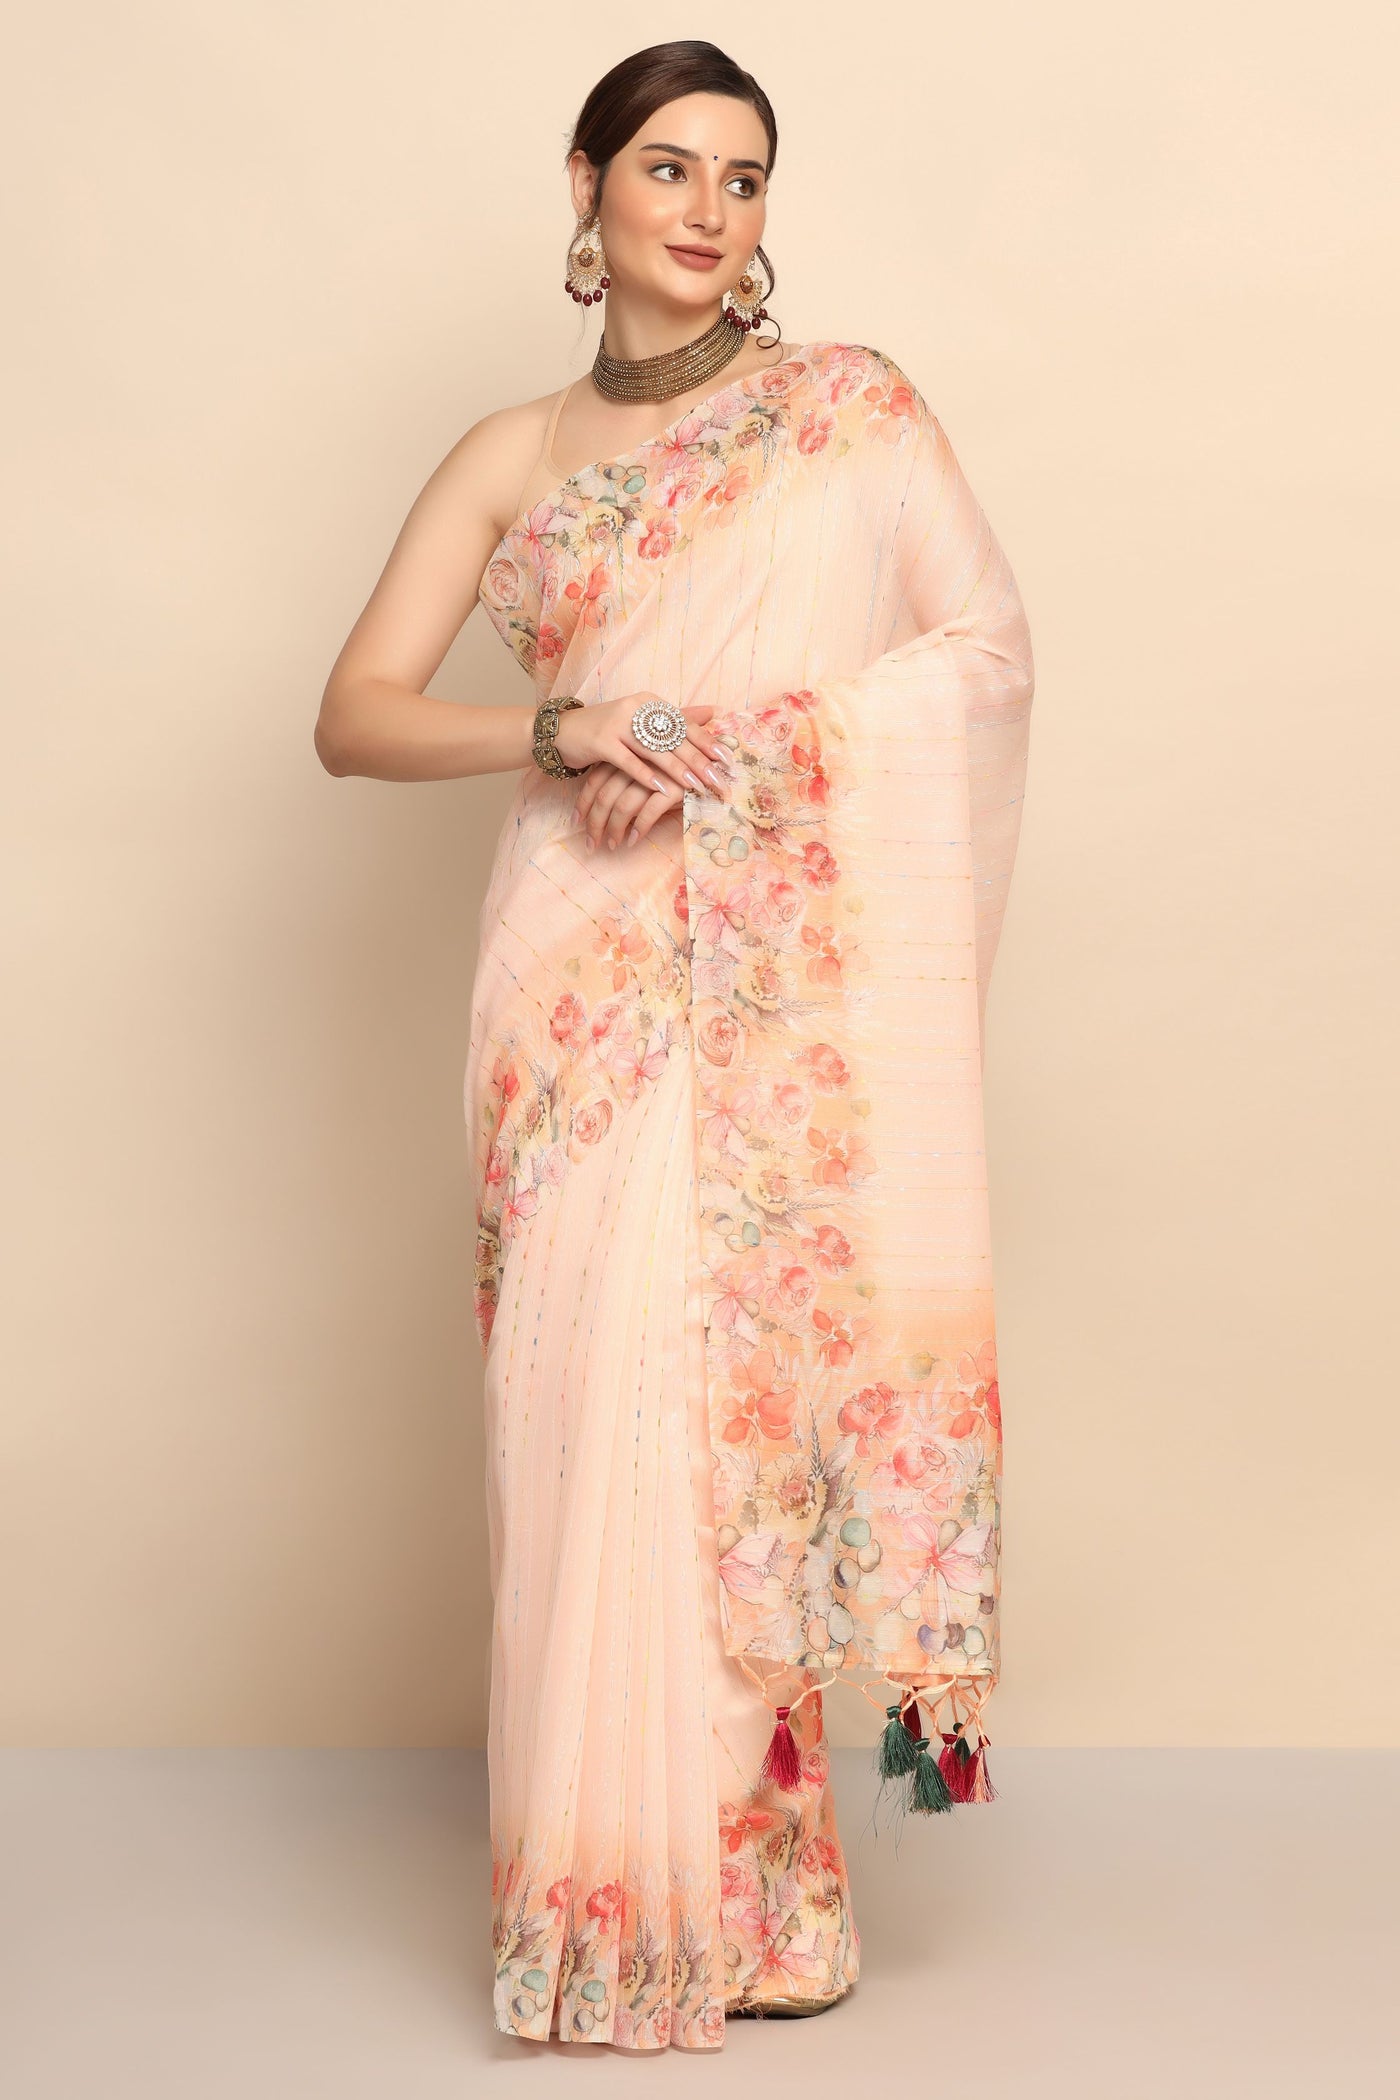 Elegant Peach Color Silk Blend Saree with Intricate Thread Work and Floral Motif